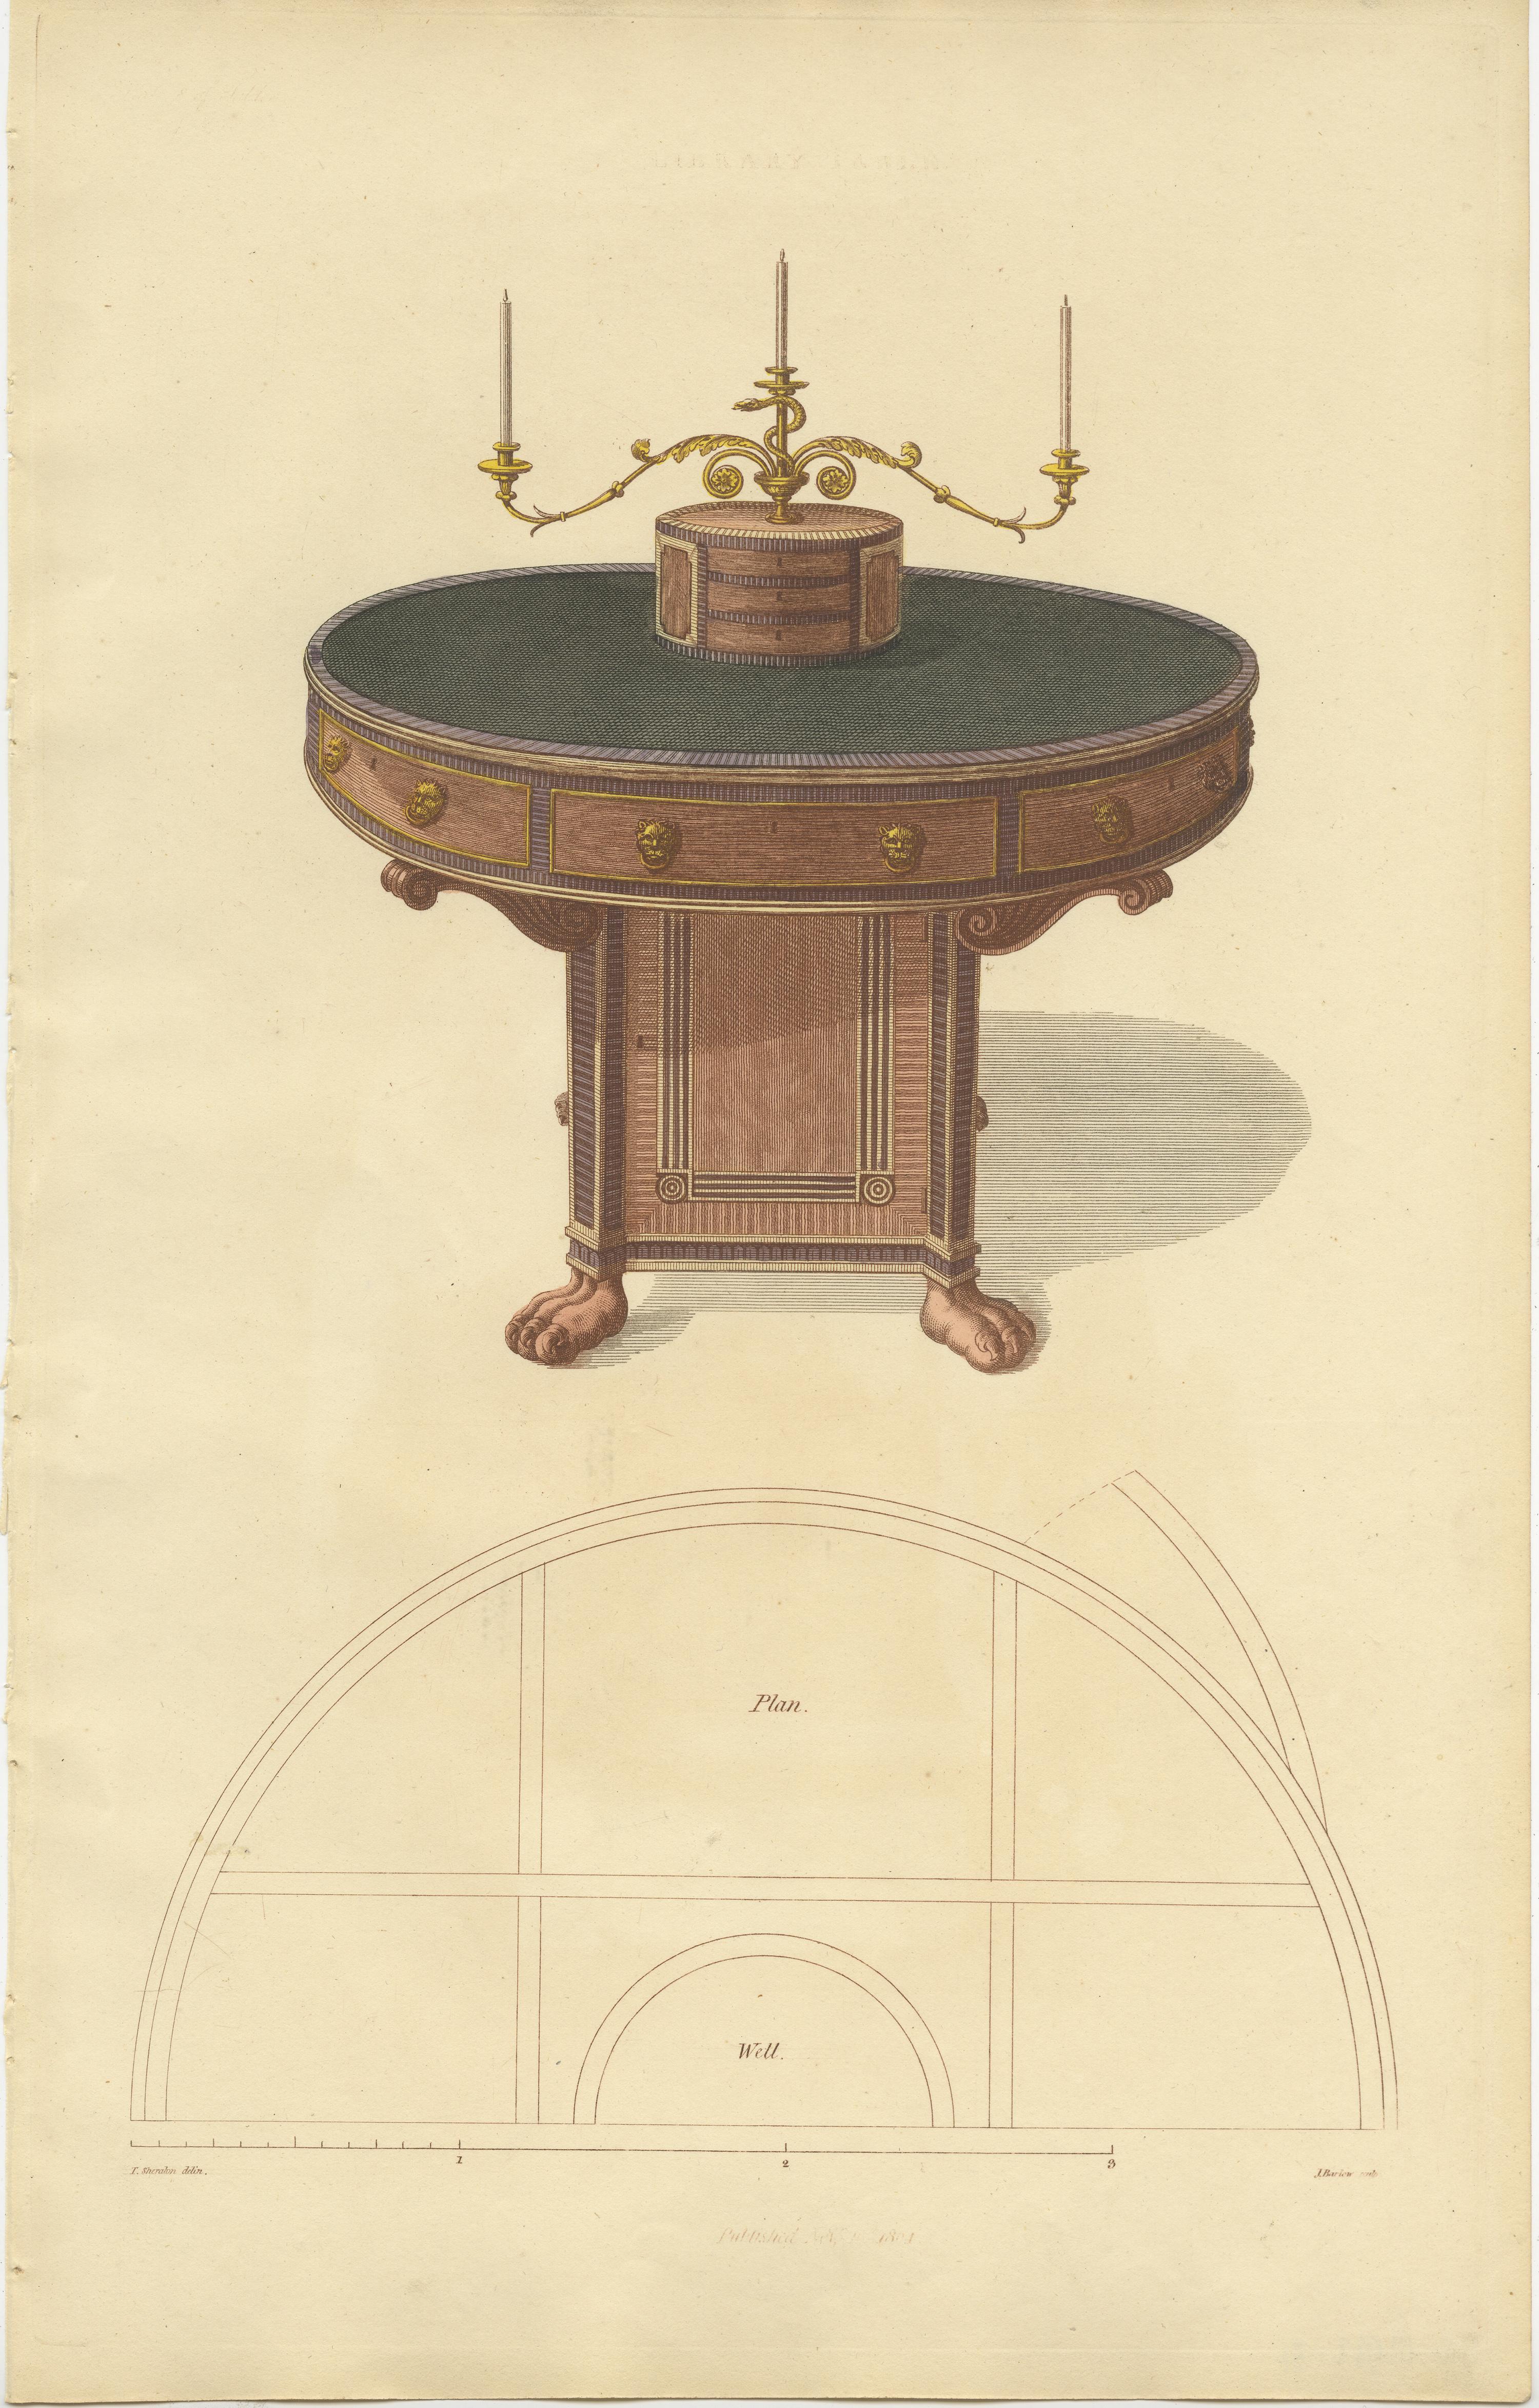 Set of 10 Antique Prints of Cabinets and Other Furniture by Sheraton '1805' For Sale 1